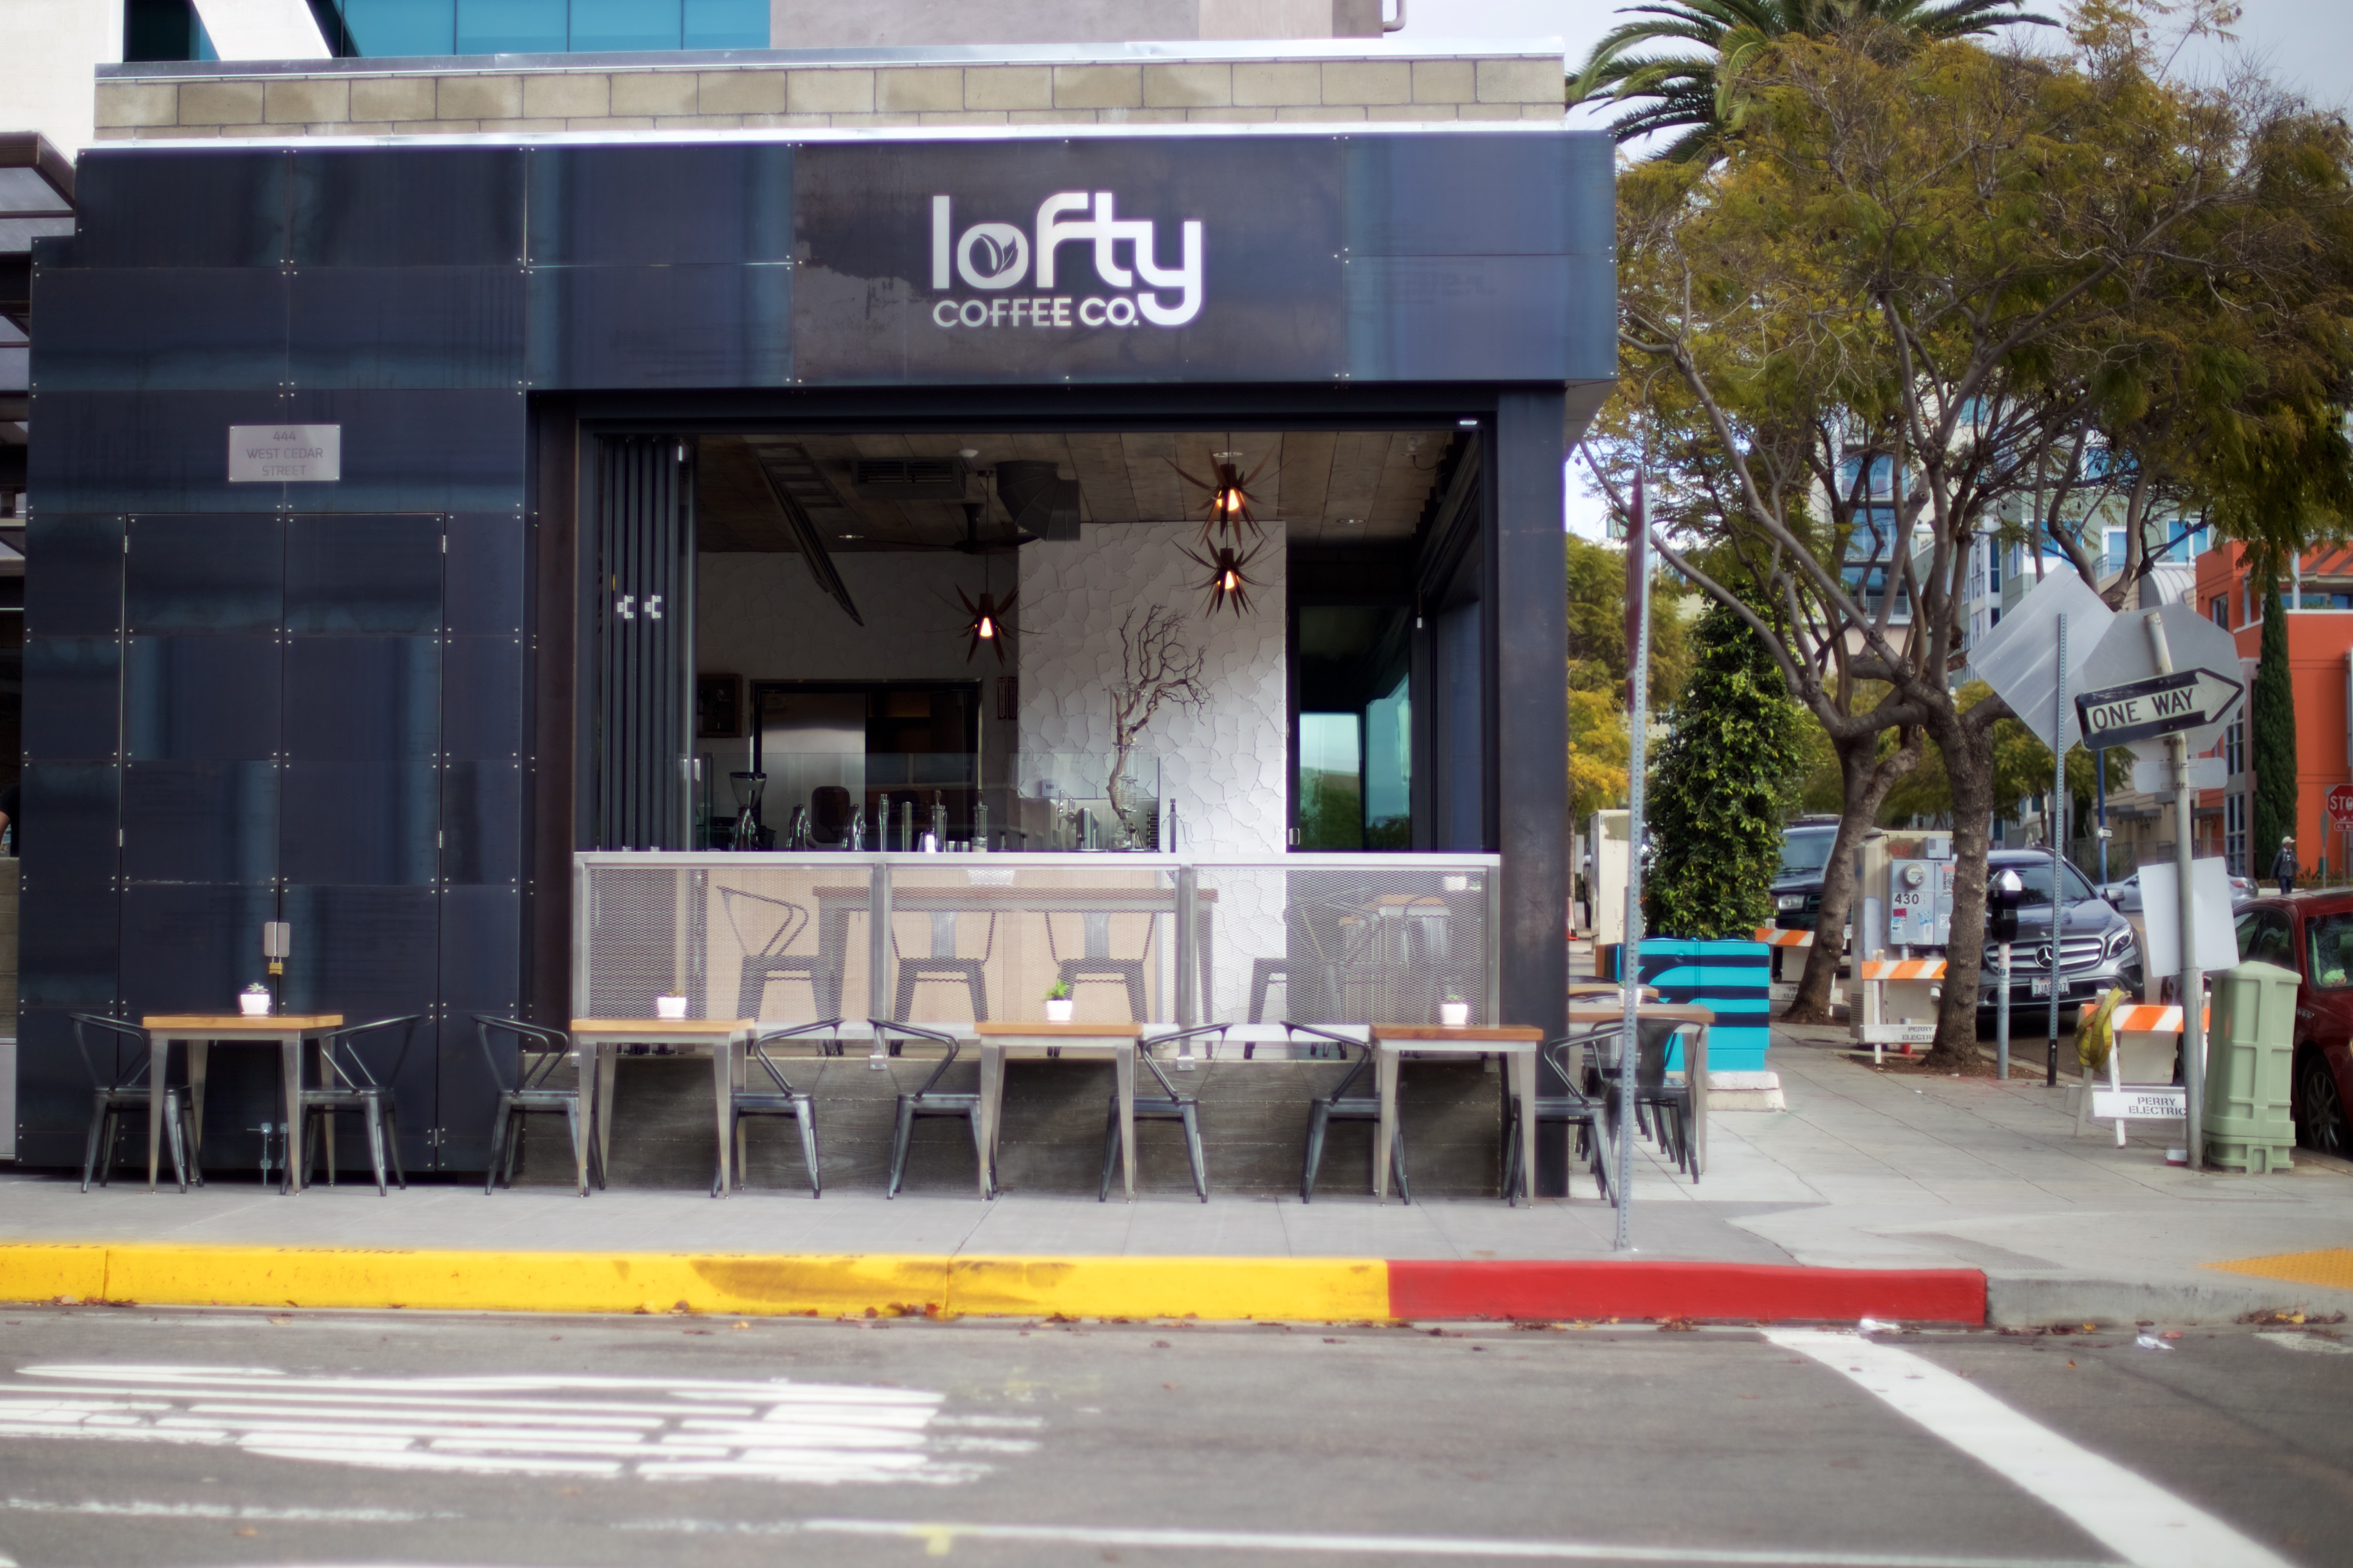 Lofty Coffee Co Makes Welcome Landing In Little Italy